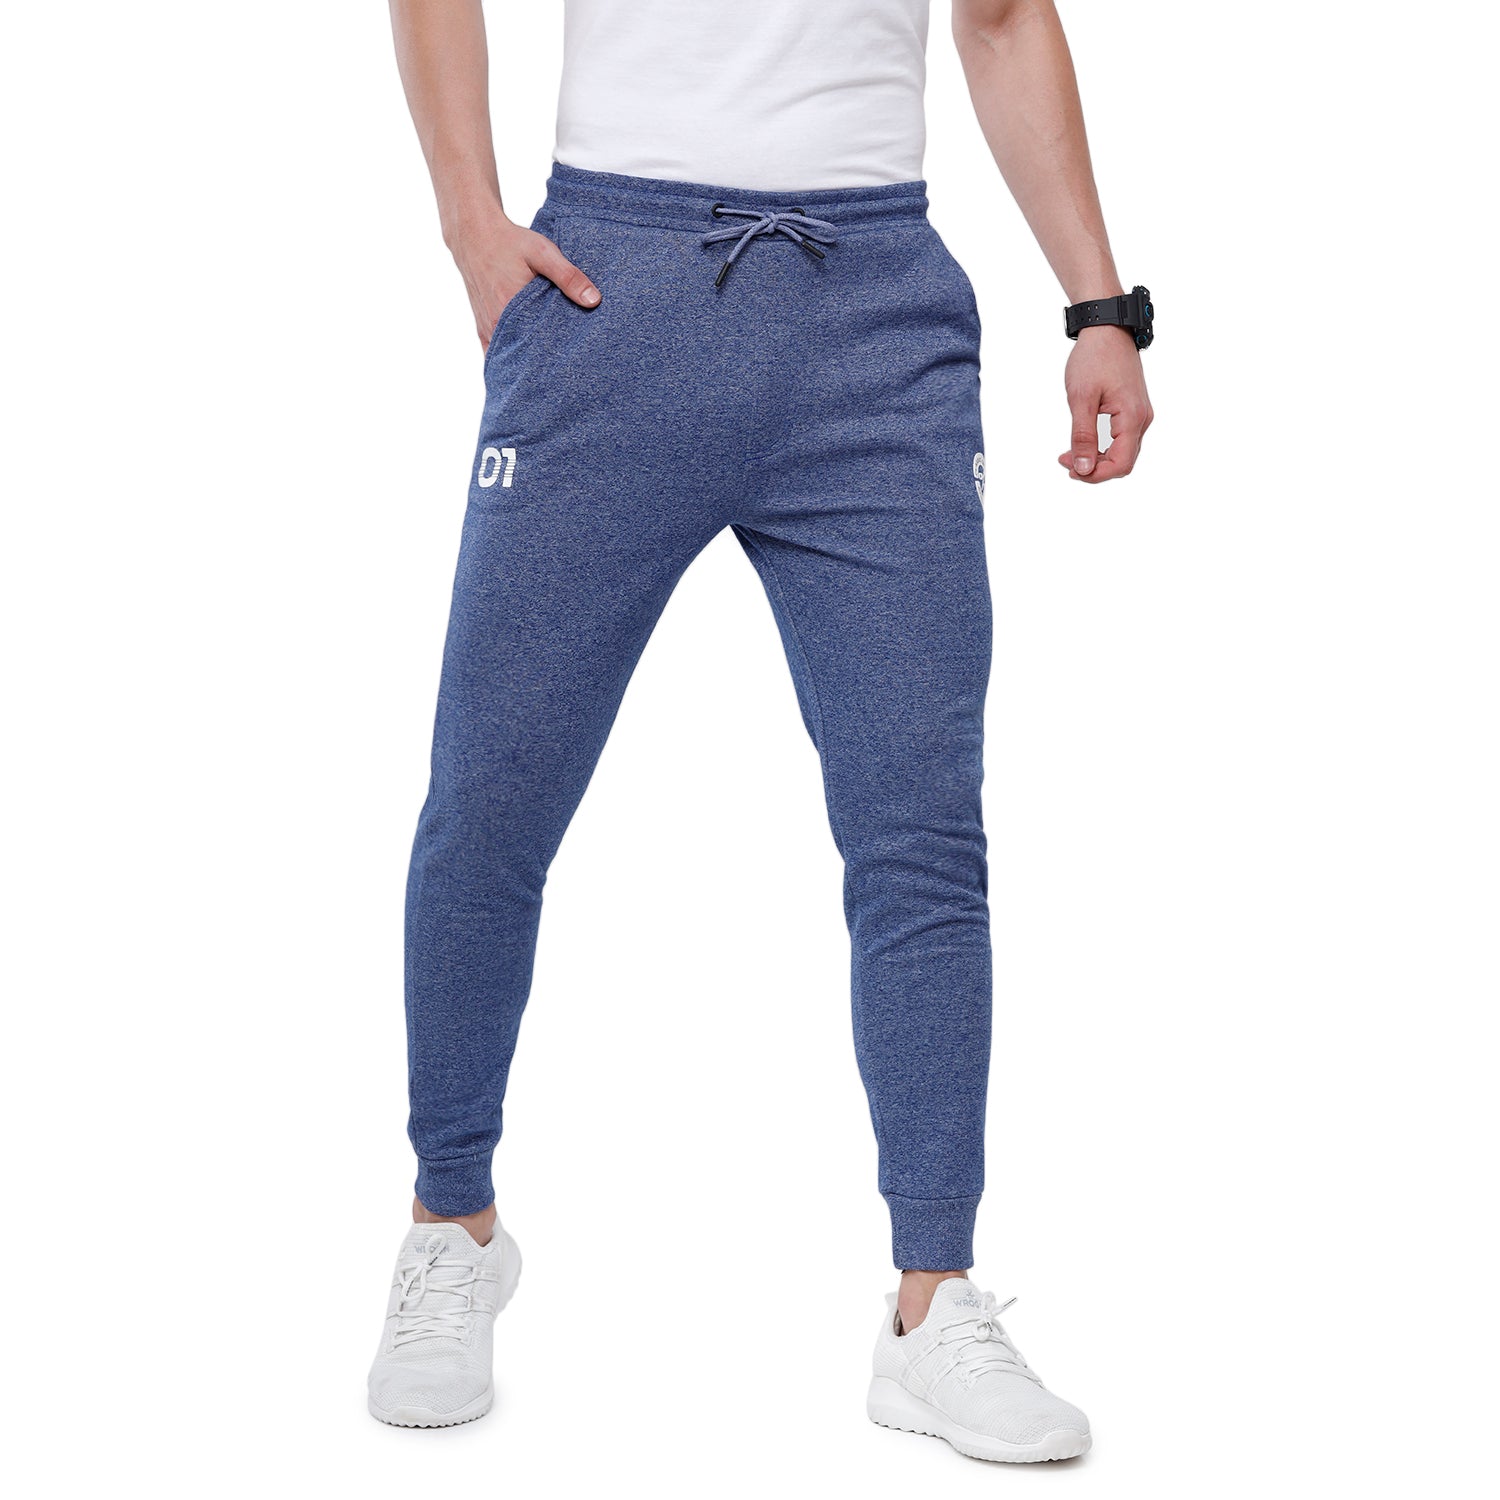 Buy For Mens Track Pants Online At Best Prices - Bodycare